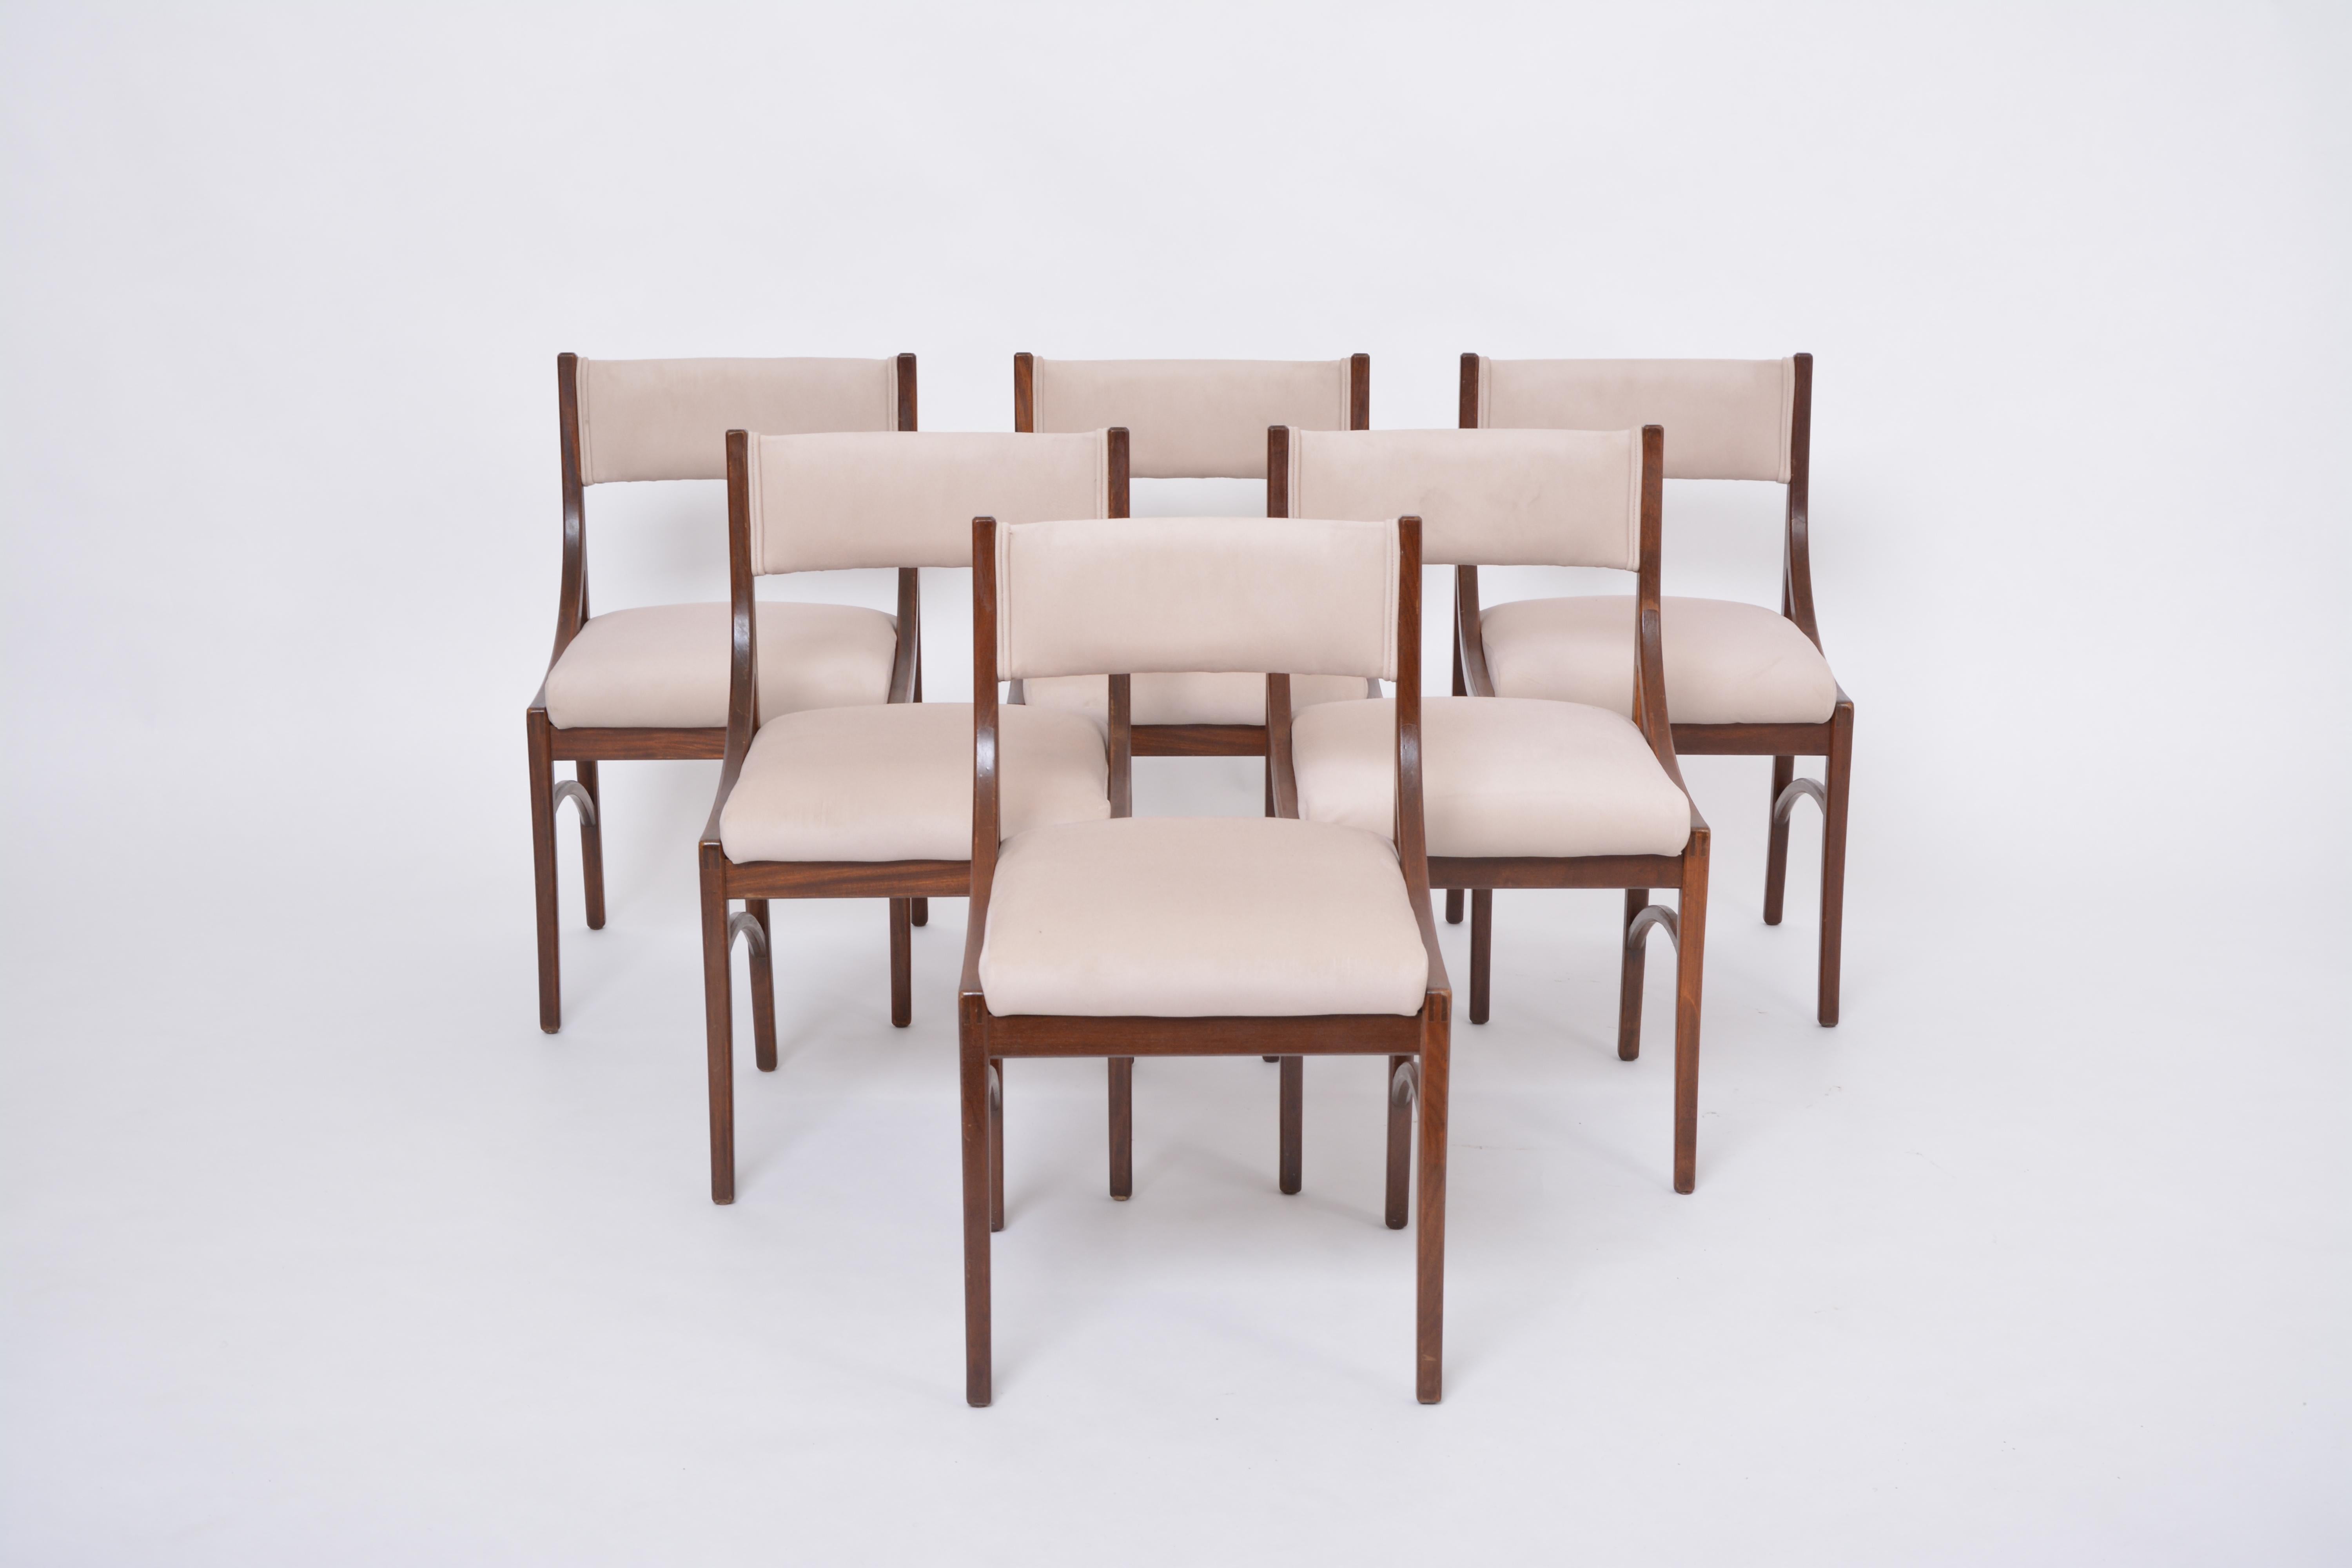 Set of six Mid-Century Modern Beige Dining Chairs by Ico Parisi for Cassina
Ico Parisi designed the model 110 chair in 1961. The chairs offered here are a version with padded backrest of this model. The chairs were produced by Gilberto Cassina in